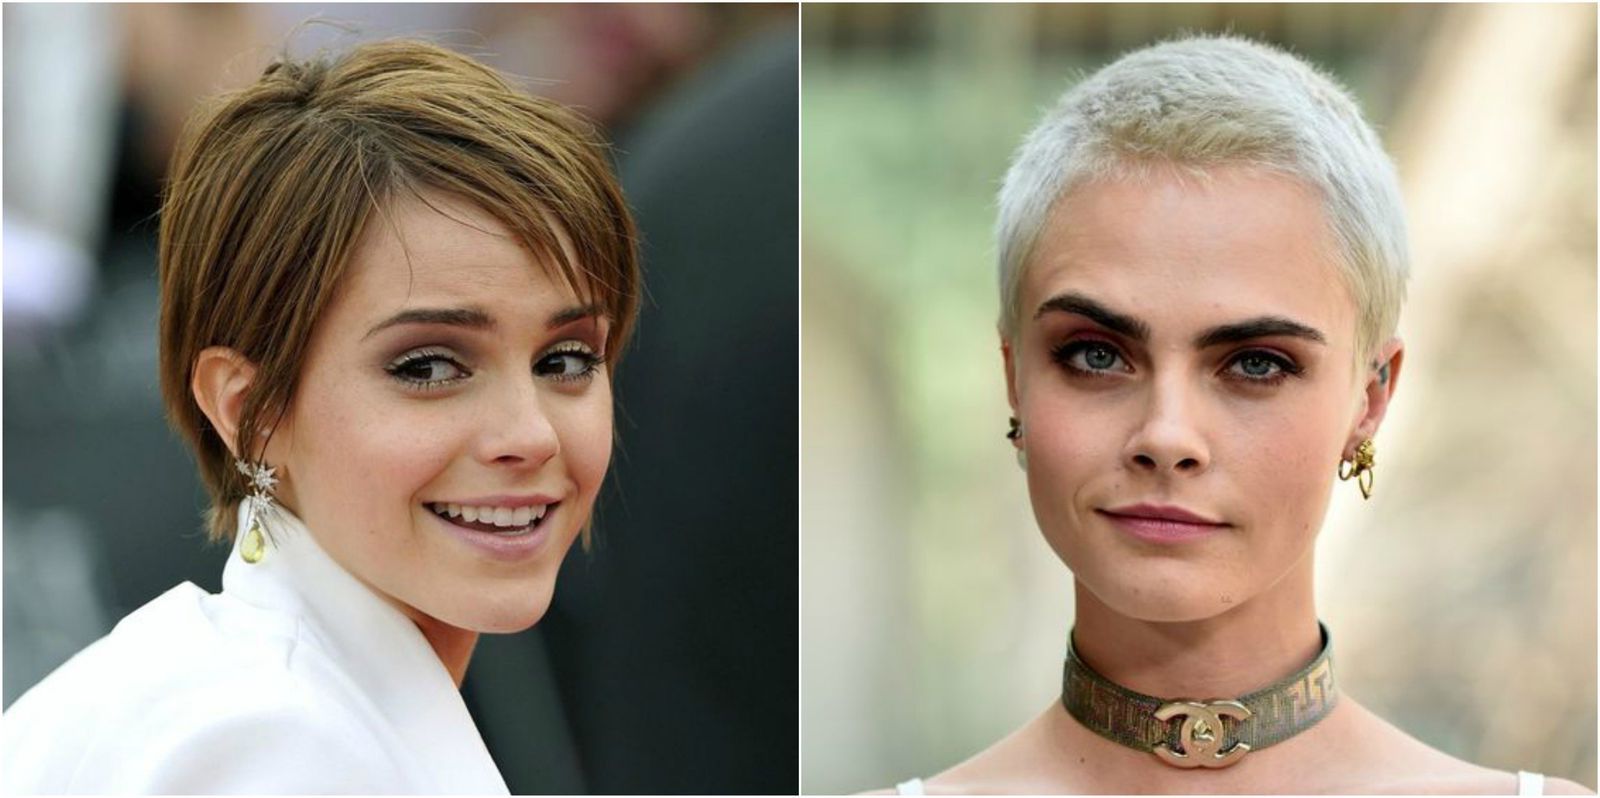 6 Ways To Get A Pixie Haircut For Every Face Shape In Well Known Bold Asian Pixie Haircuts (View 17 of 20)